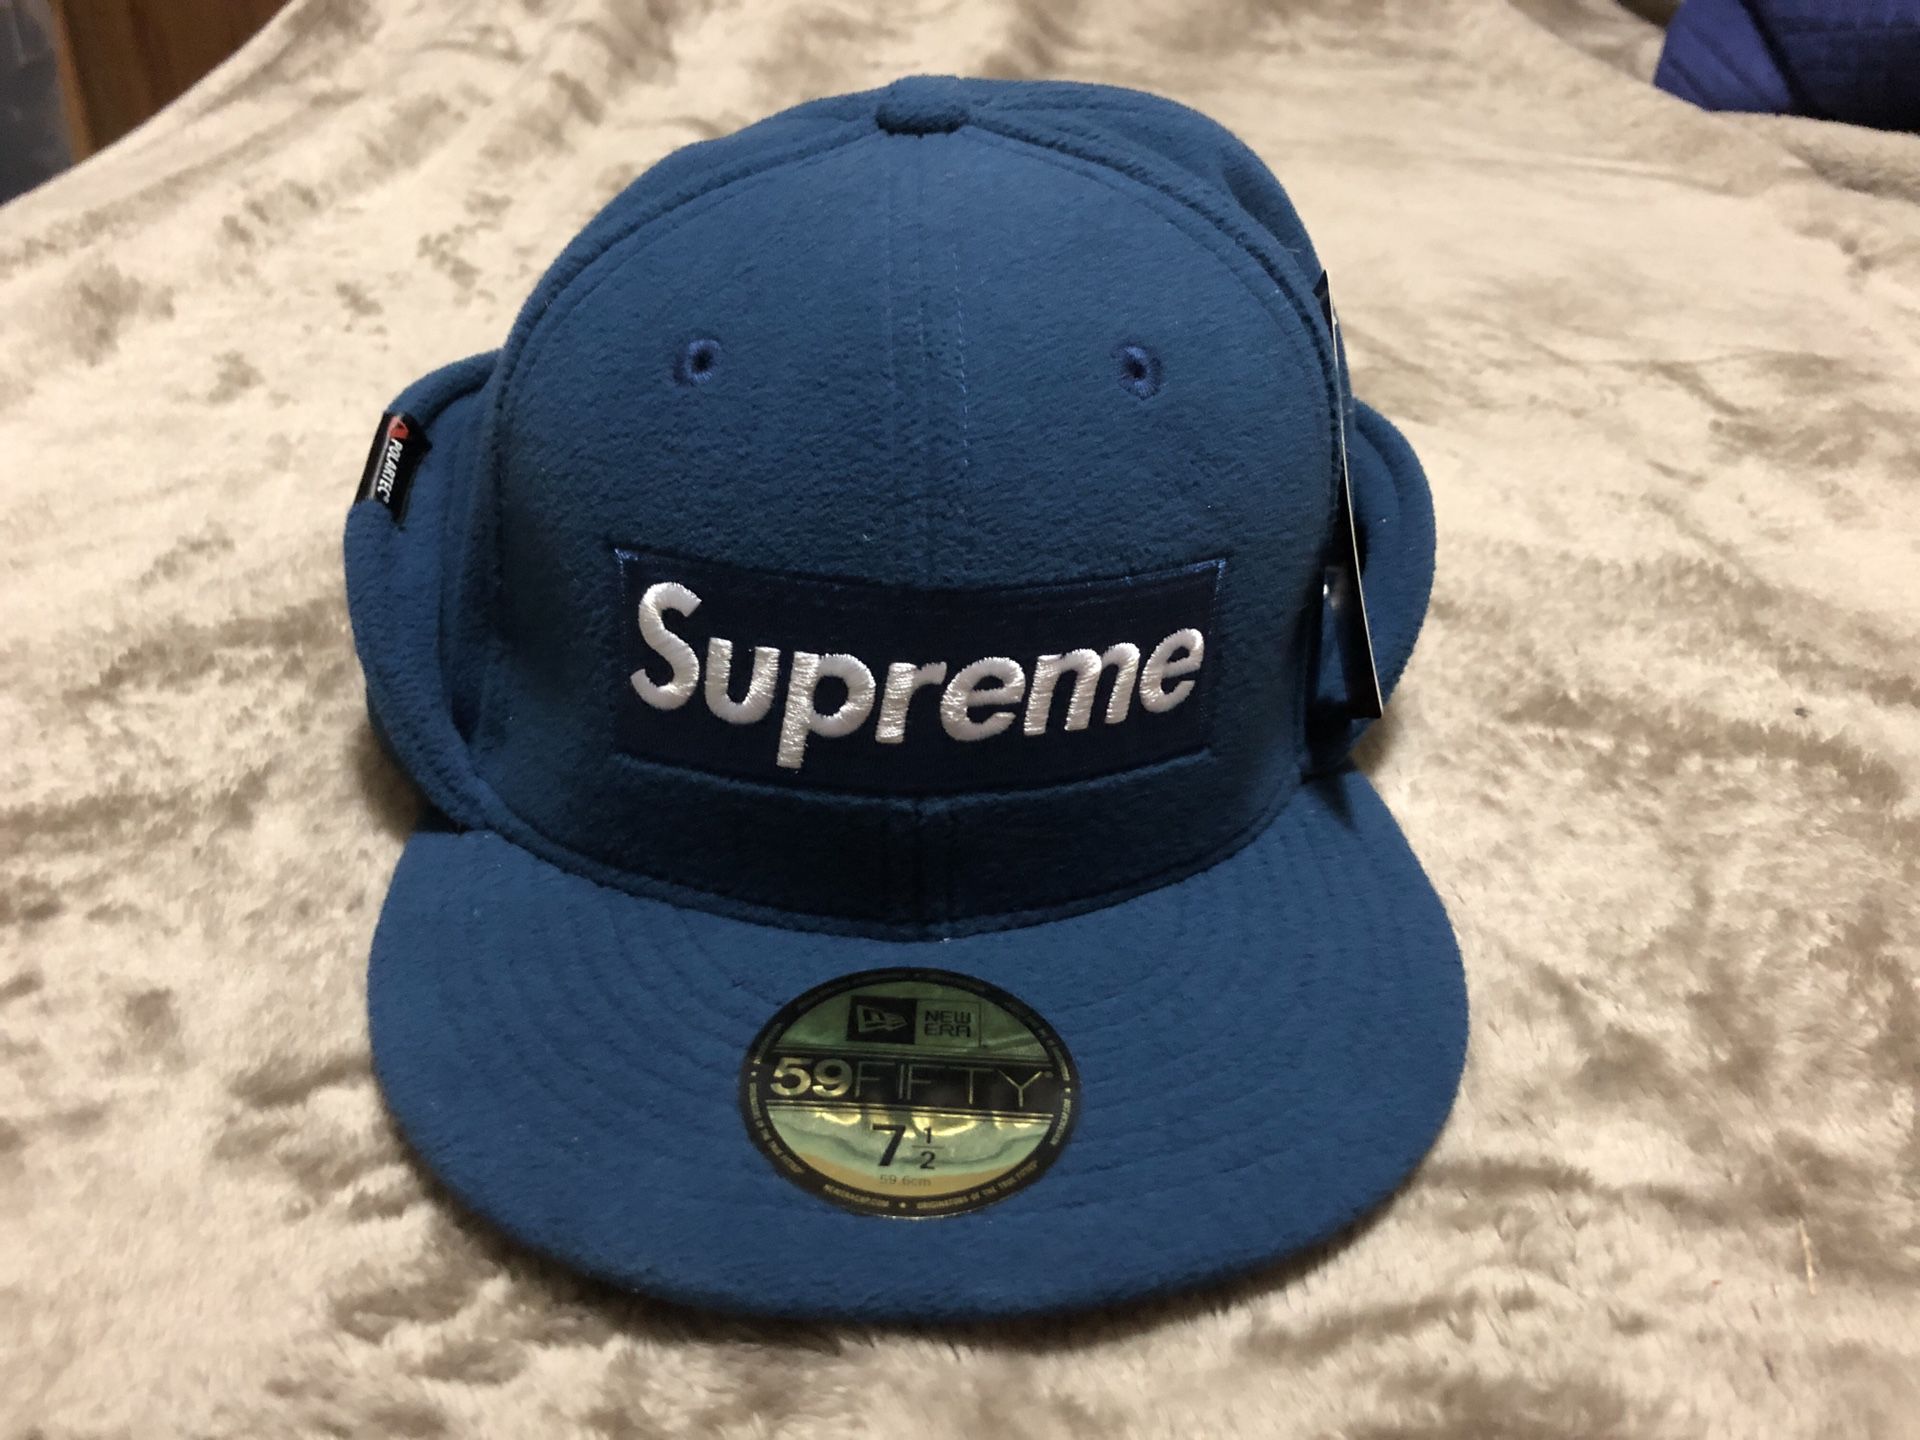 Supreme x New Era 59Fifty Polartec Fitted Hat size 7 1/2